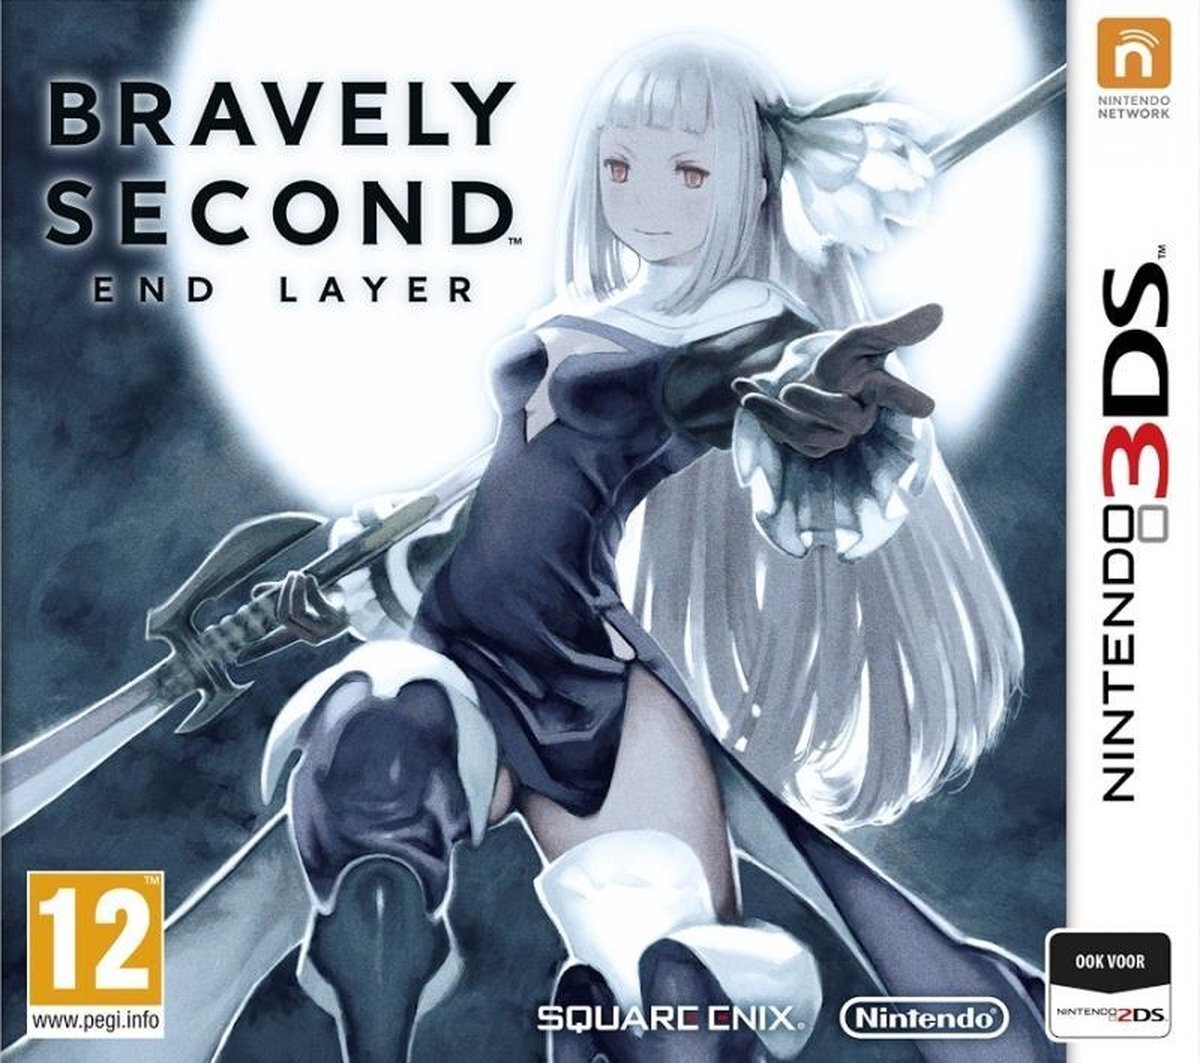 Nintendo bravely second end layer Nintendo 3DS